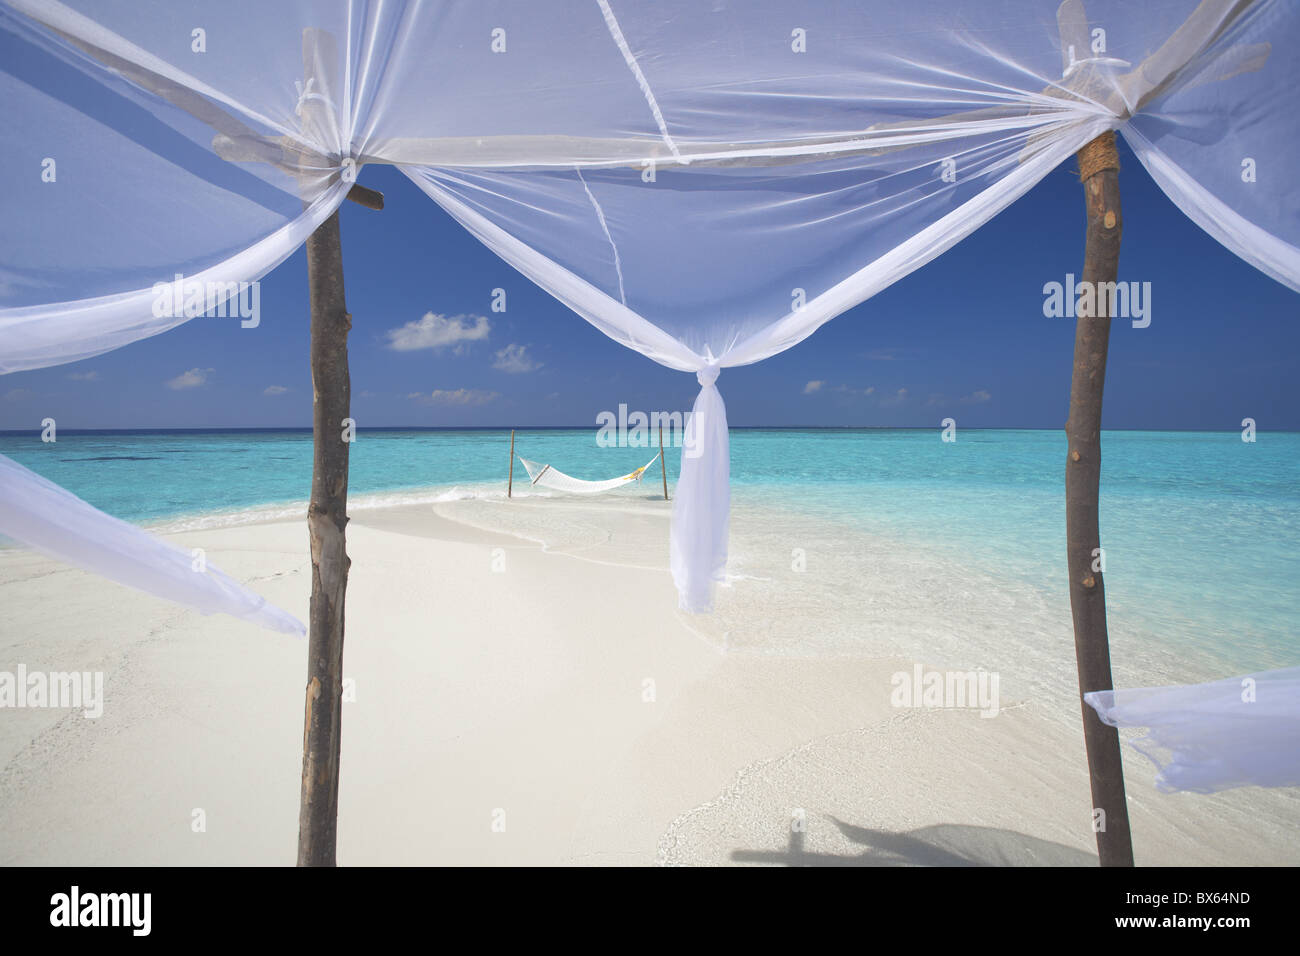 Hammock hanging in shallow clear water, The Maldives, Indian Ocean, Asia Stock Photo